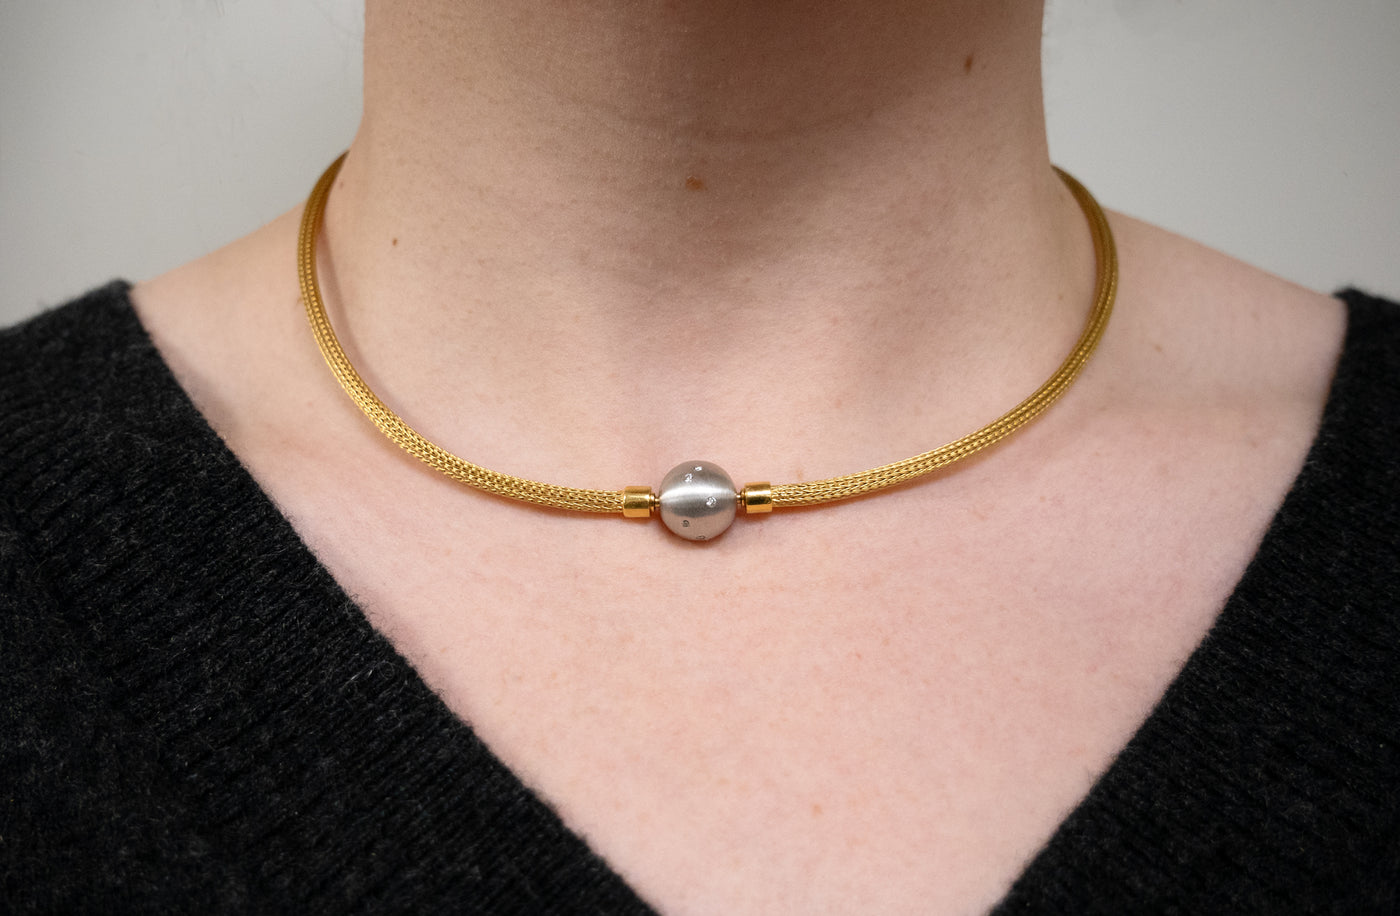 Woven Chain Necklace with Diamond Set Clasp in Gold